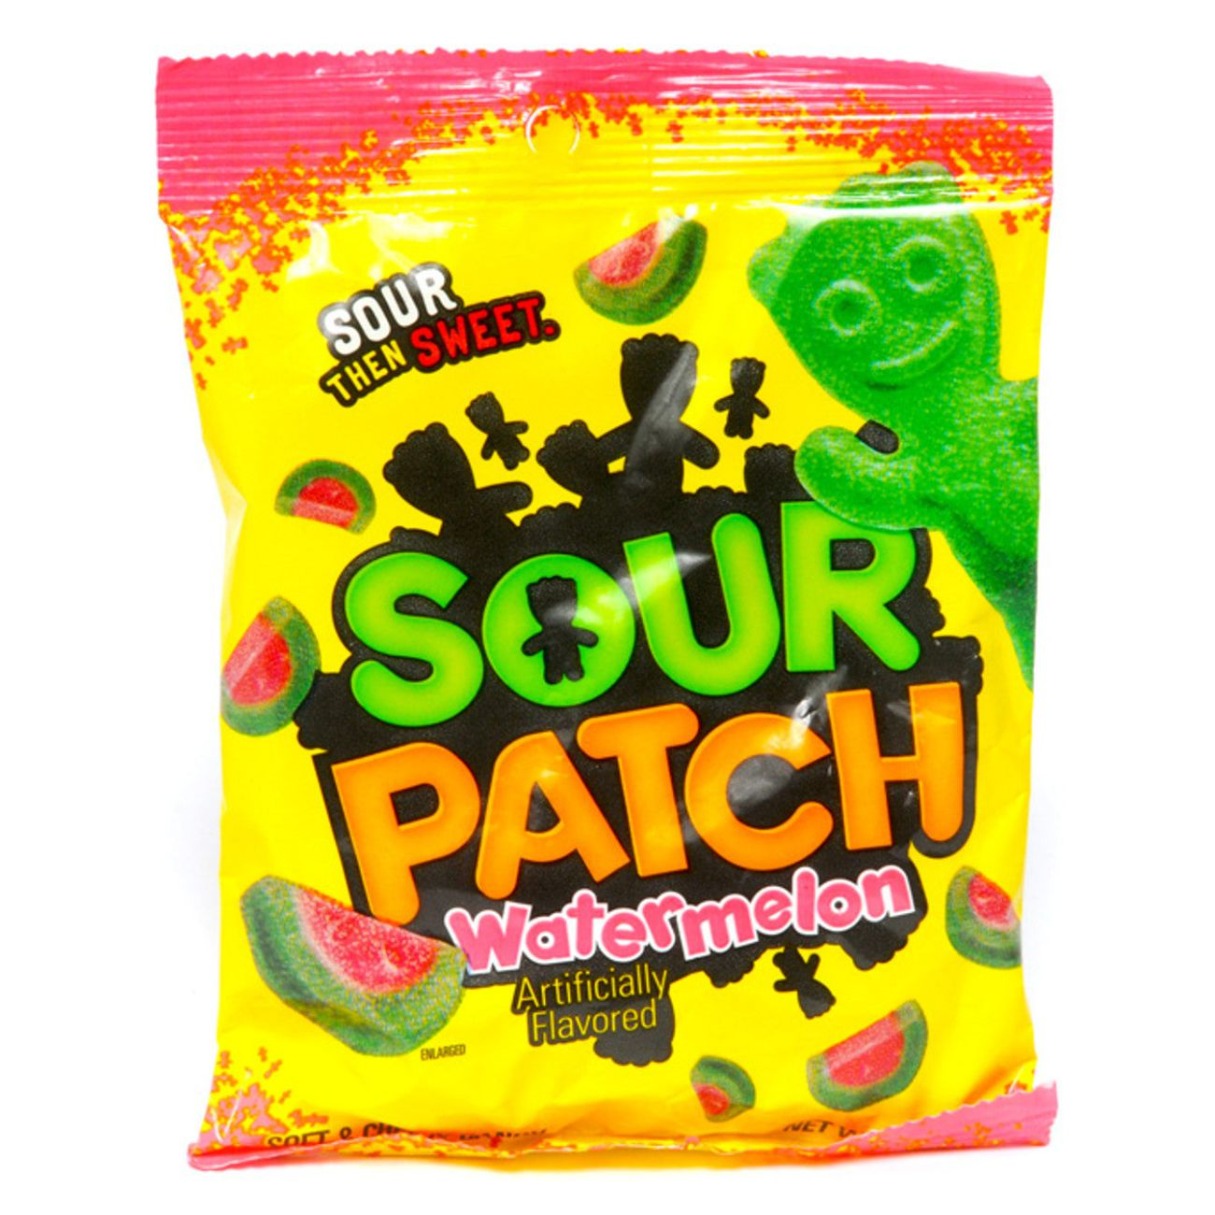 Sour Patch Watermelon Soft & Chewy Candy Bag 3.6oz - 12ct